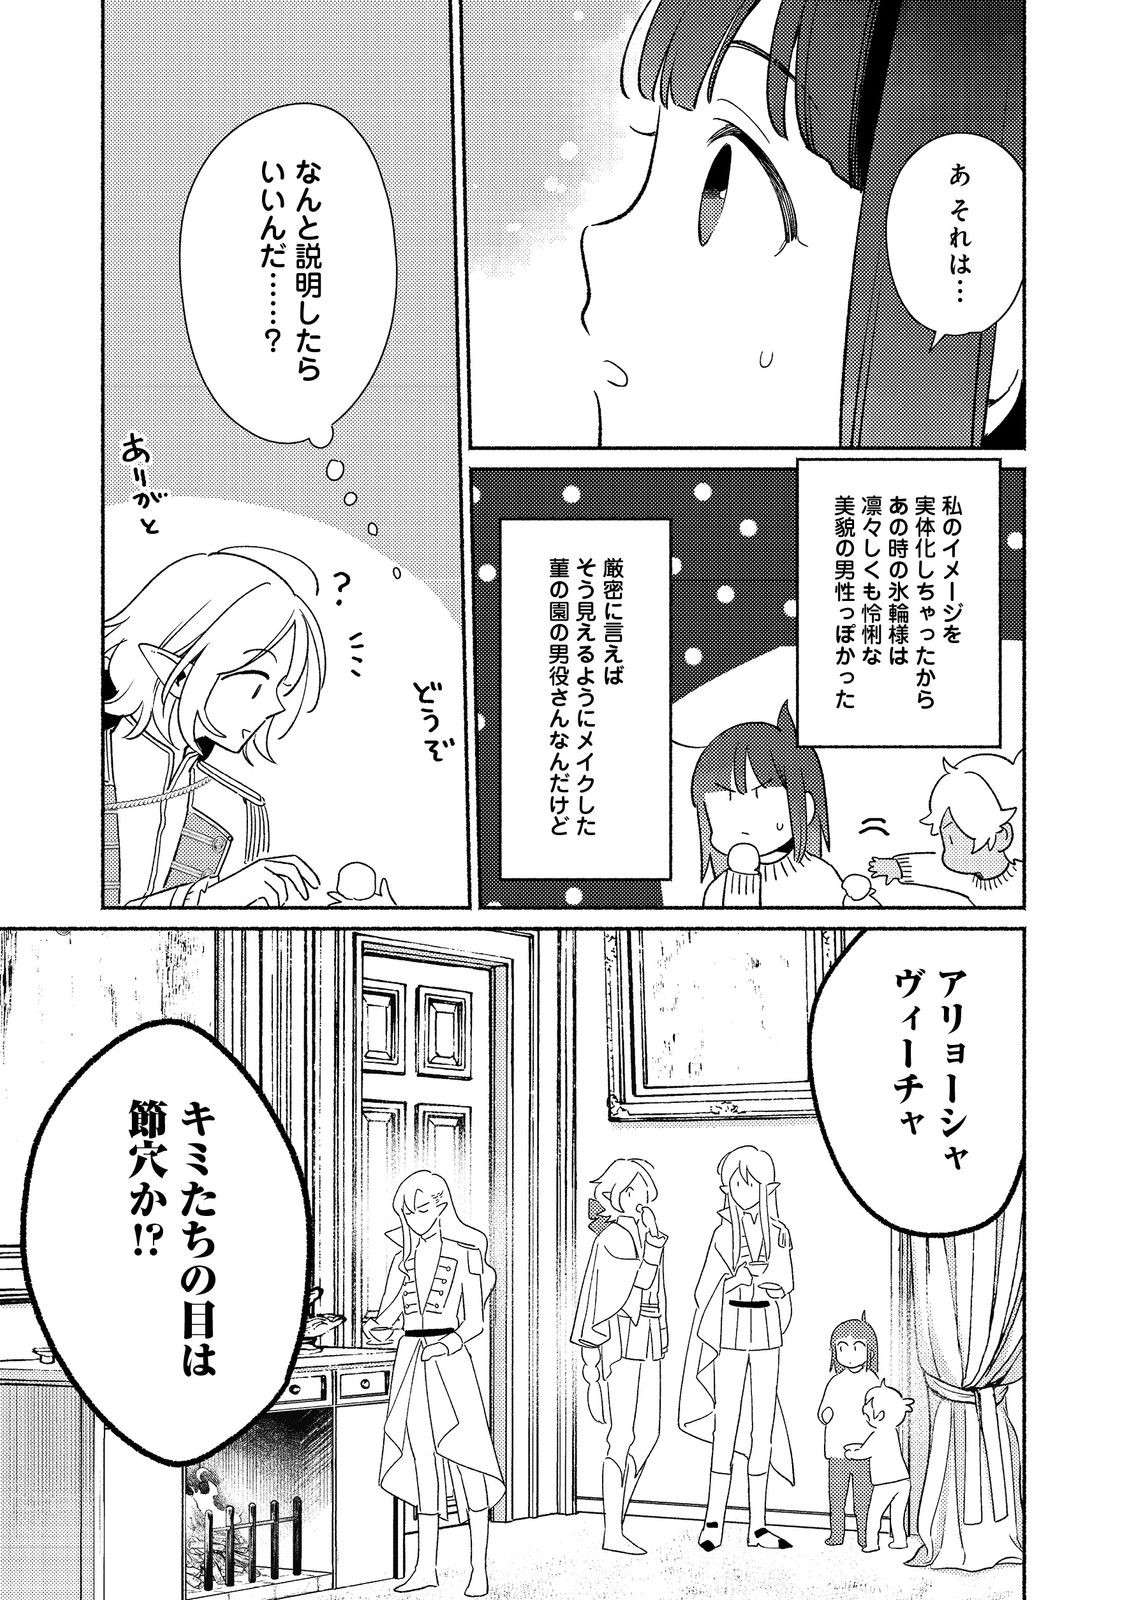 I’m the White Pig Nobleman 第26.2話 - Page 10